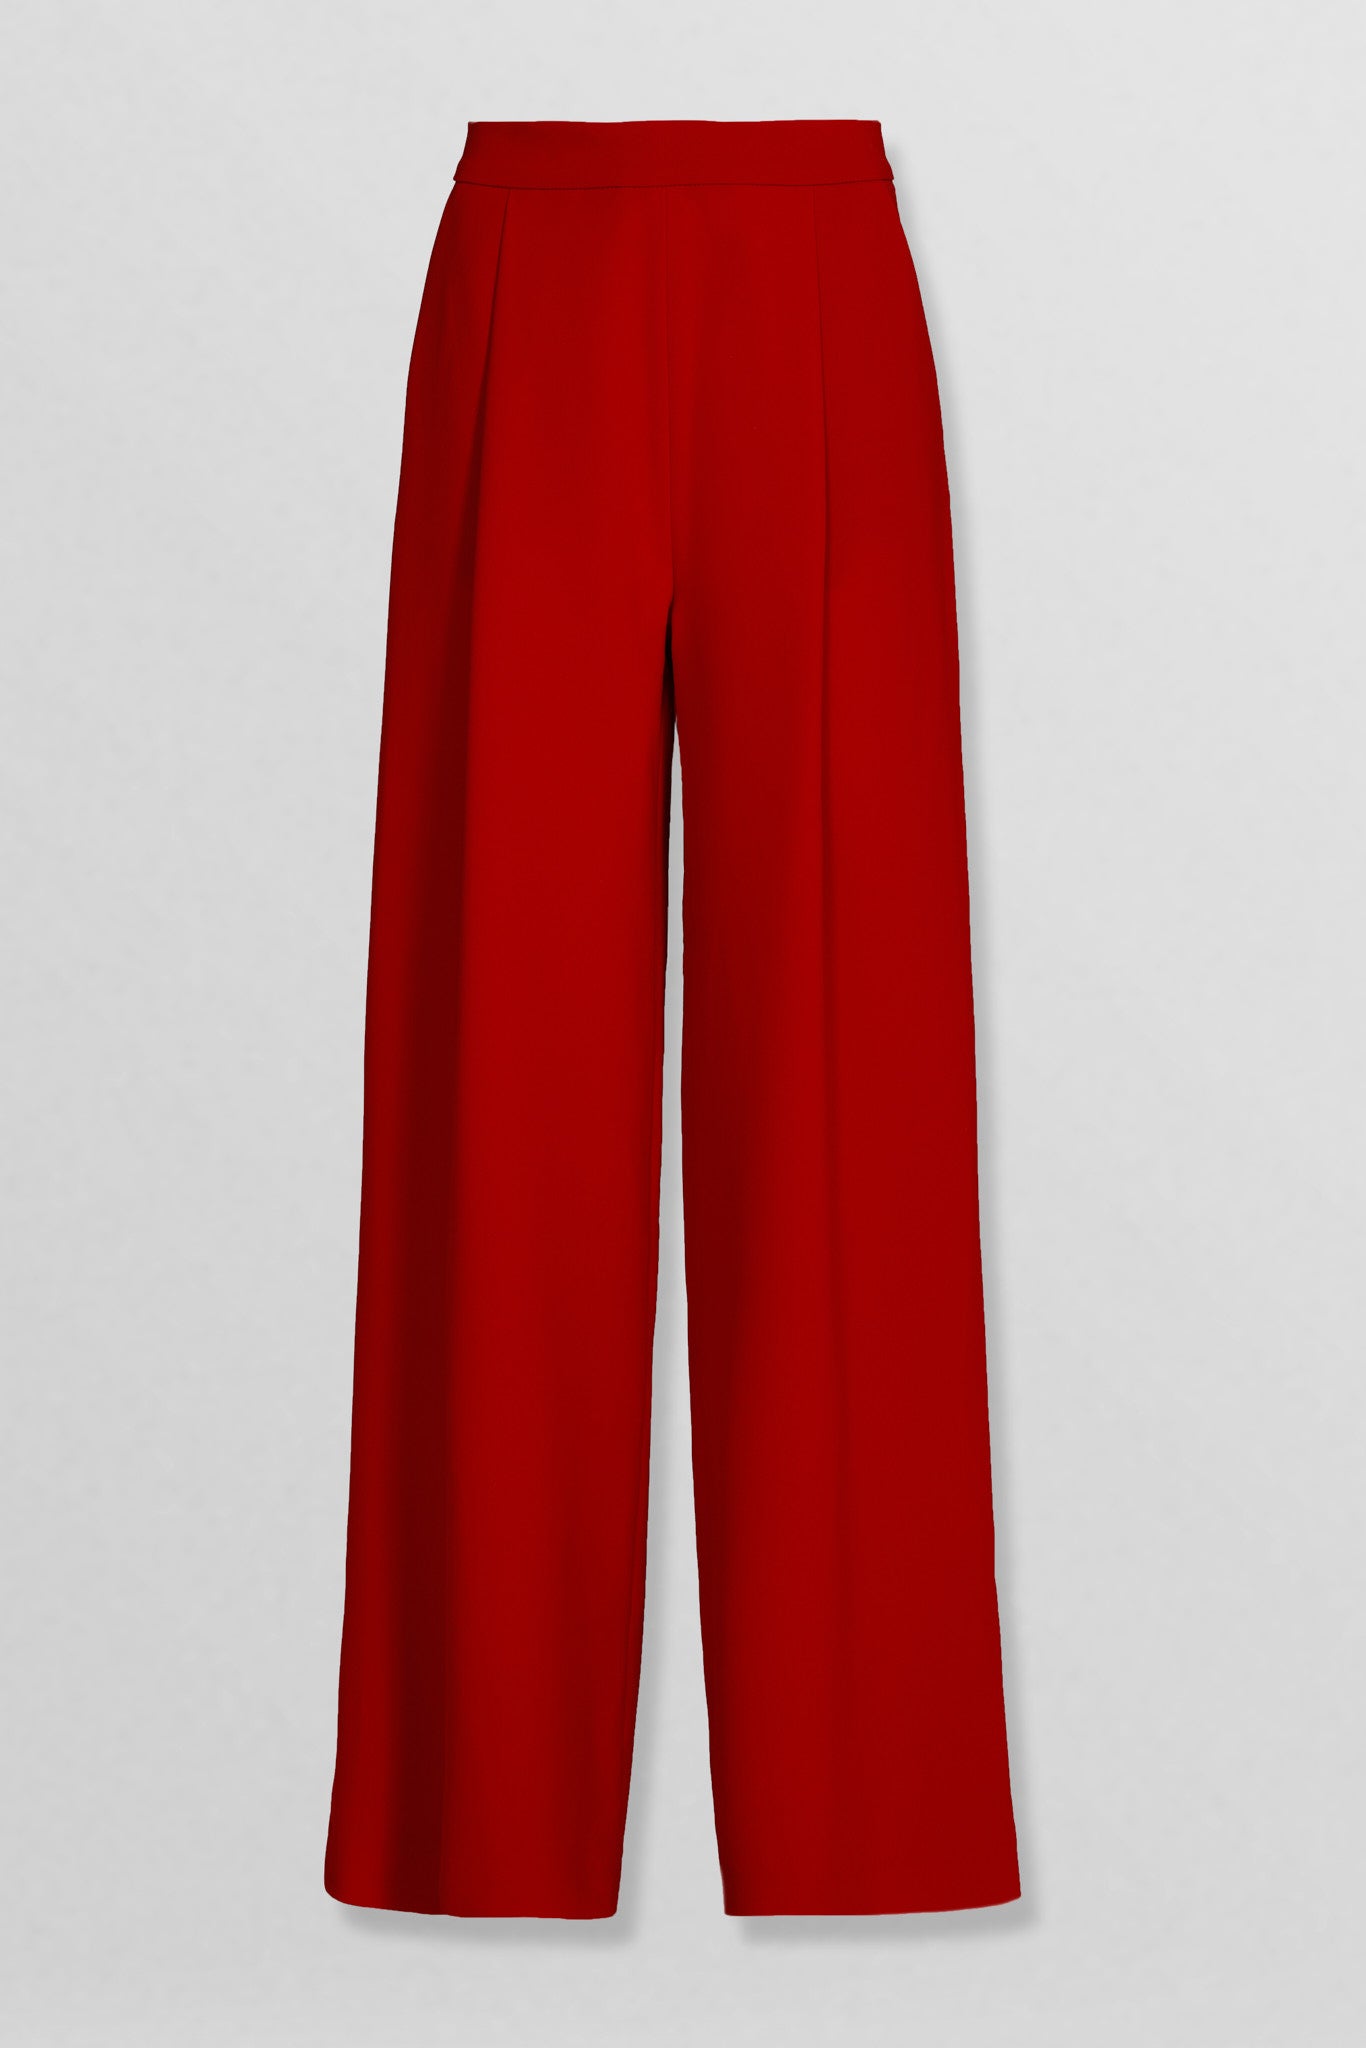 Rust Red Trousers - Wide-Leg Pants - Pleated Trouser Pants - Lulus